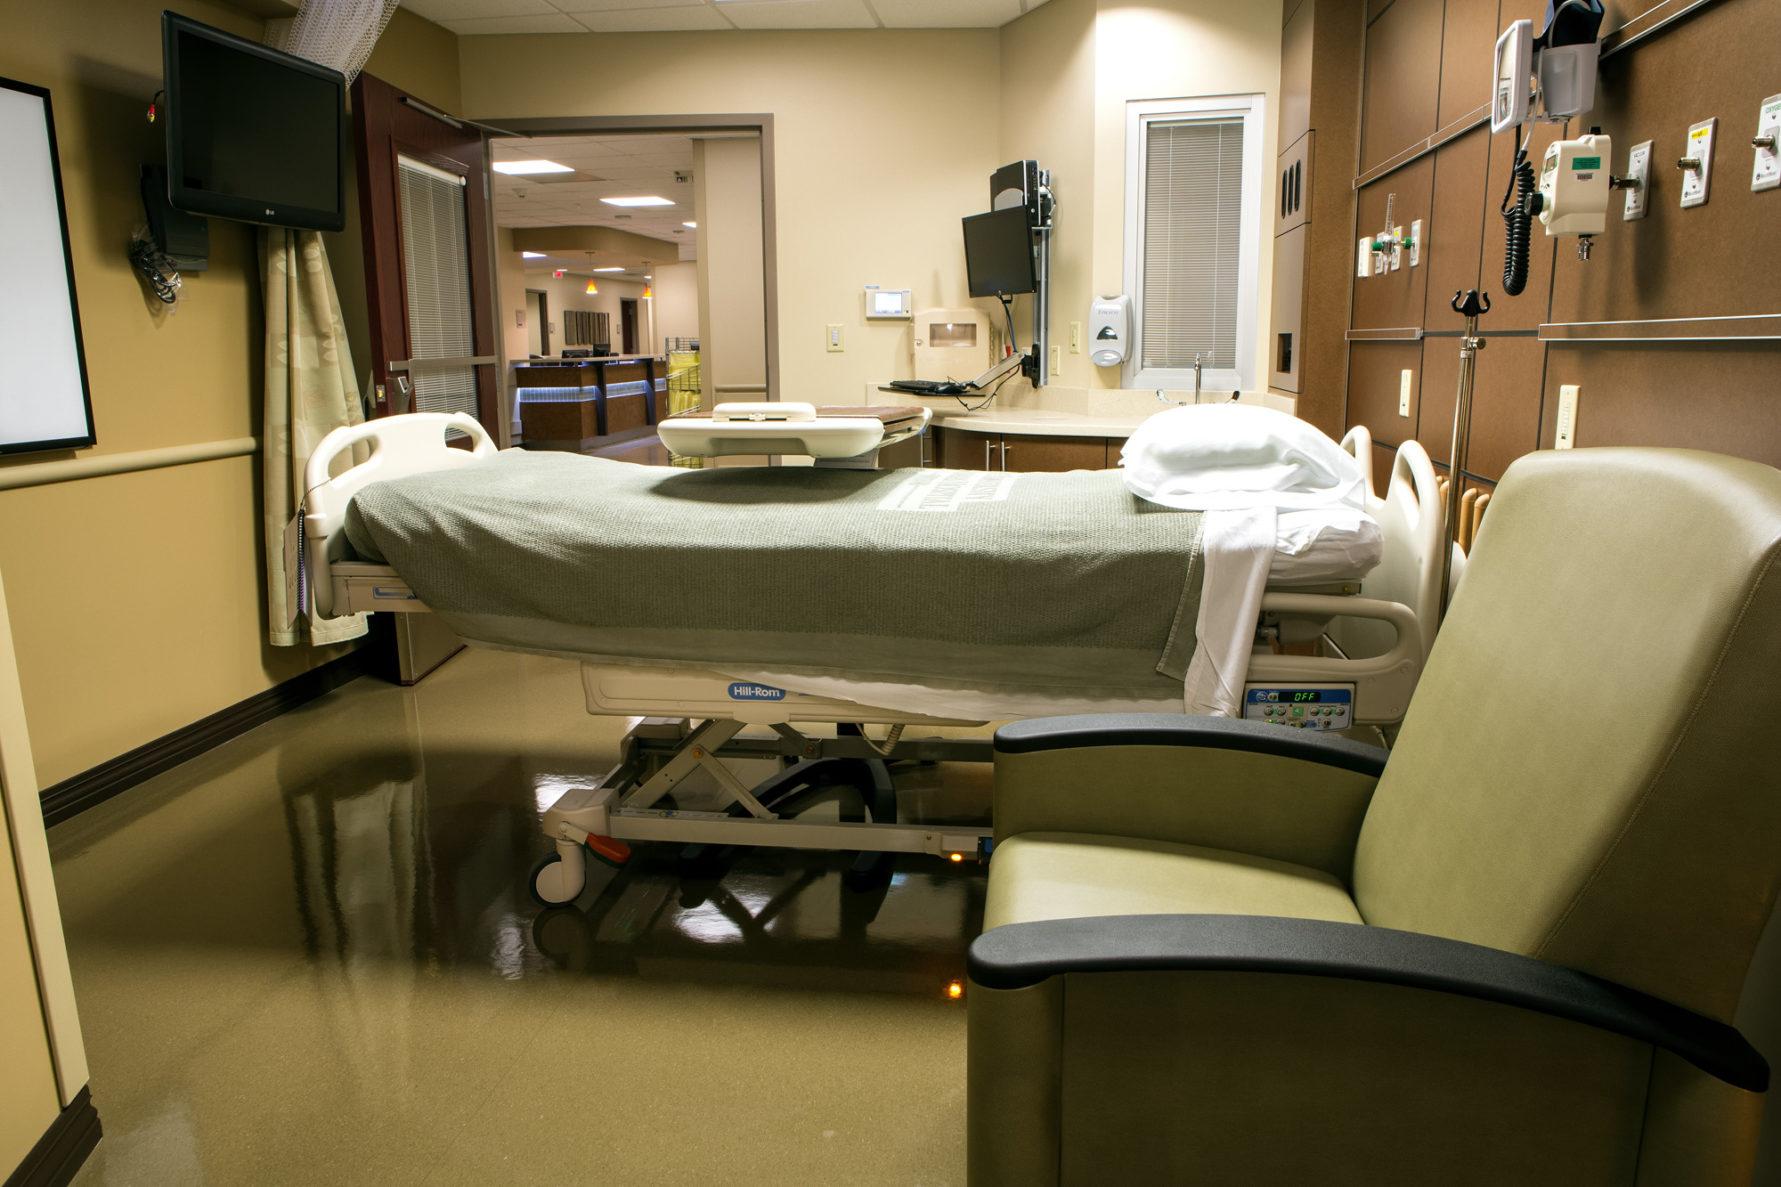 University of kansas health system patient bed